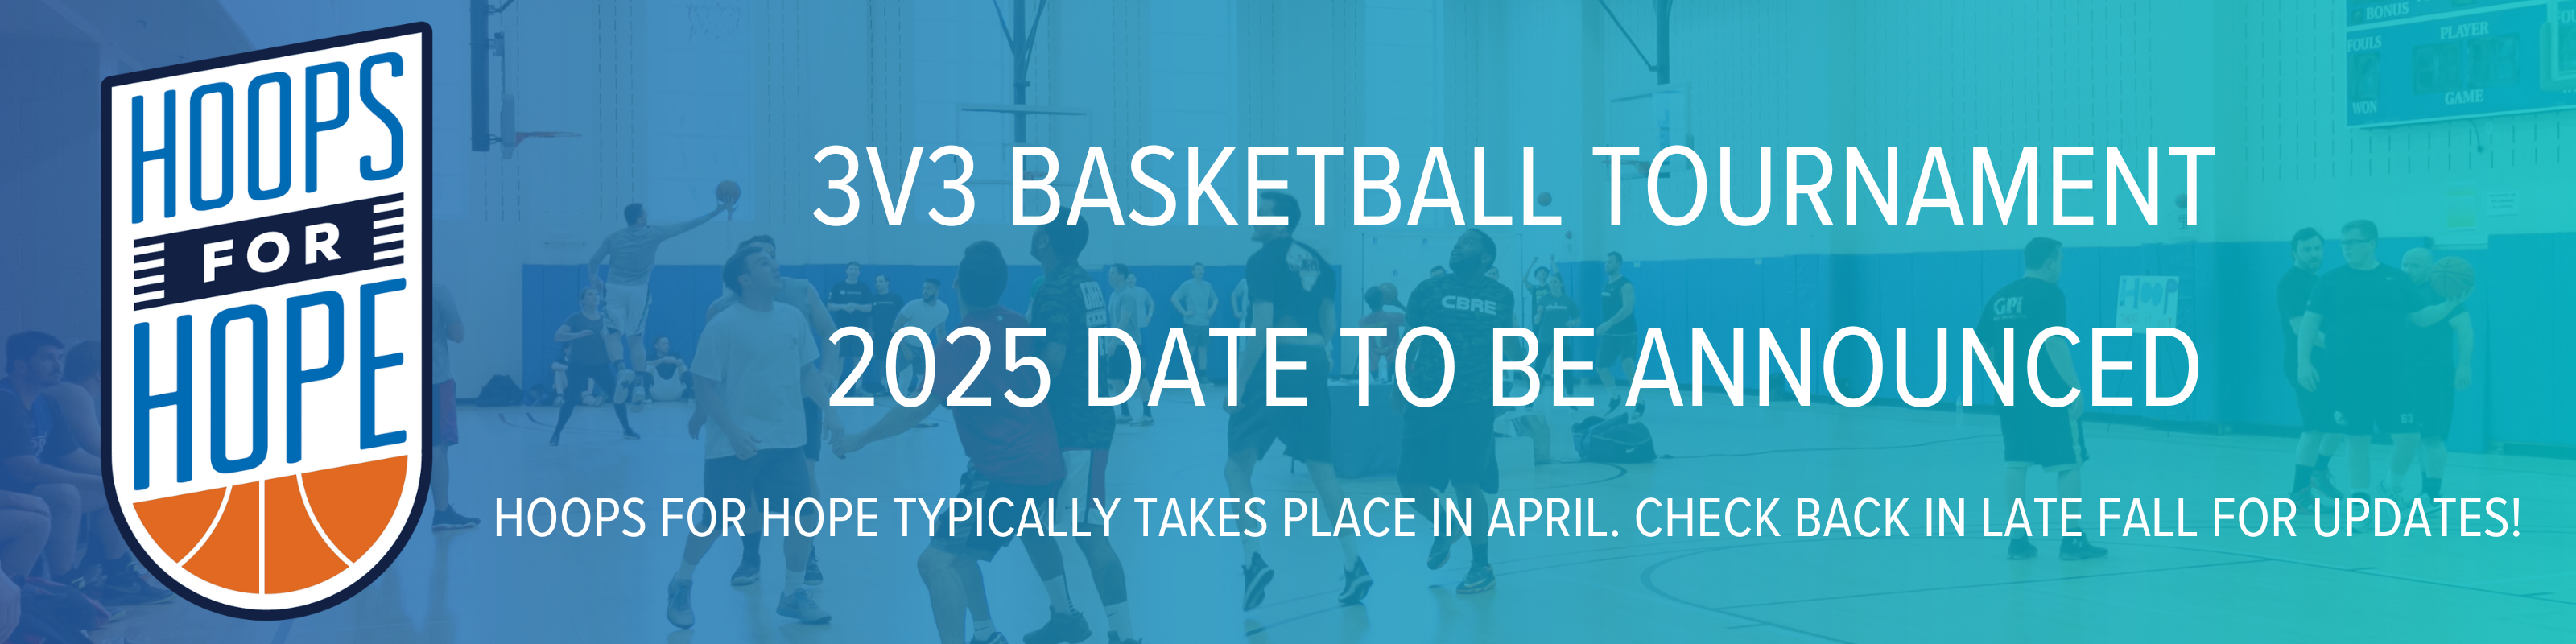 3v3 Basketball Tournament 2025 Date to Be Announced. Hoops for Hope Typically takes place in April. Check back in Late fall for updates!